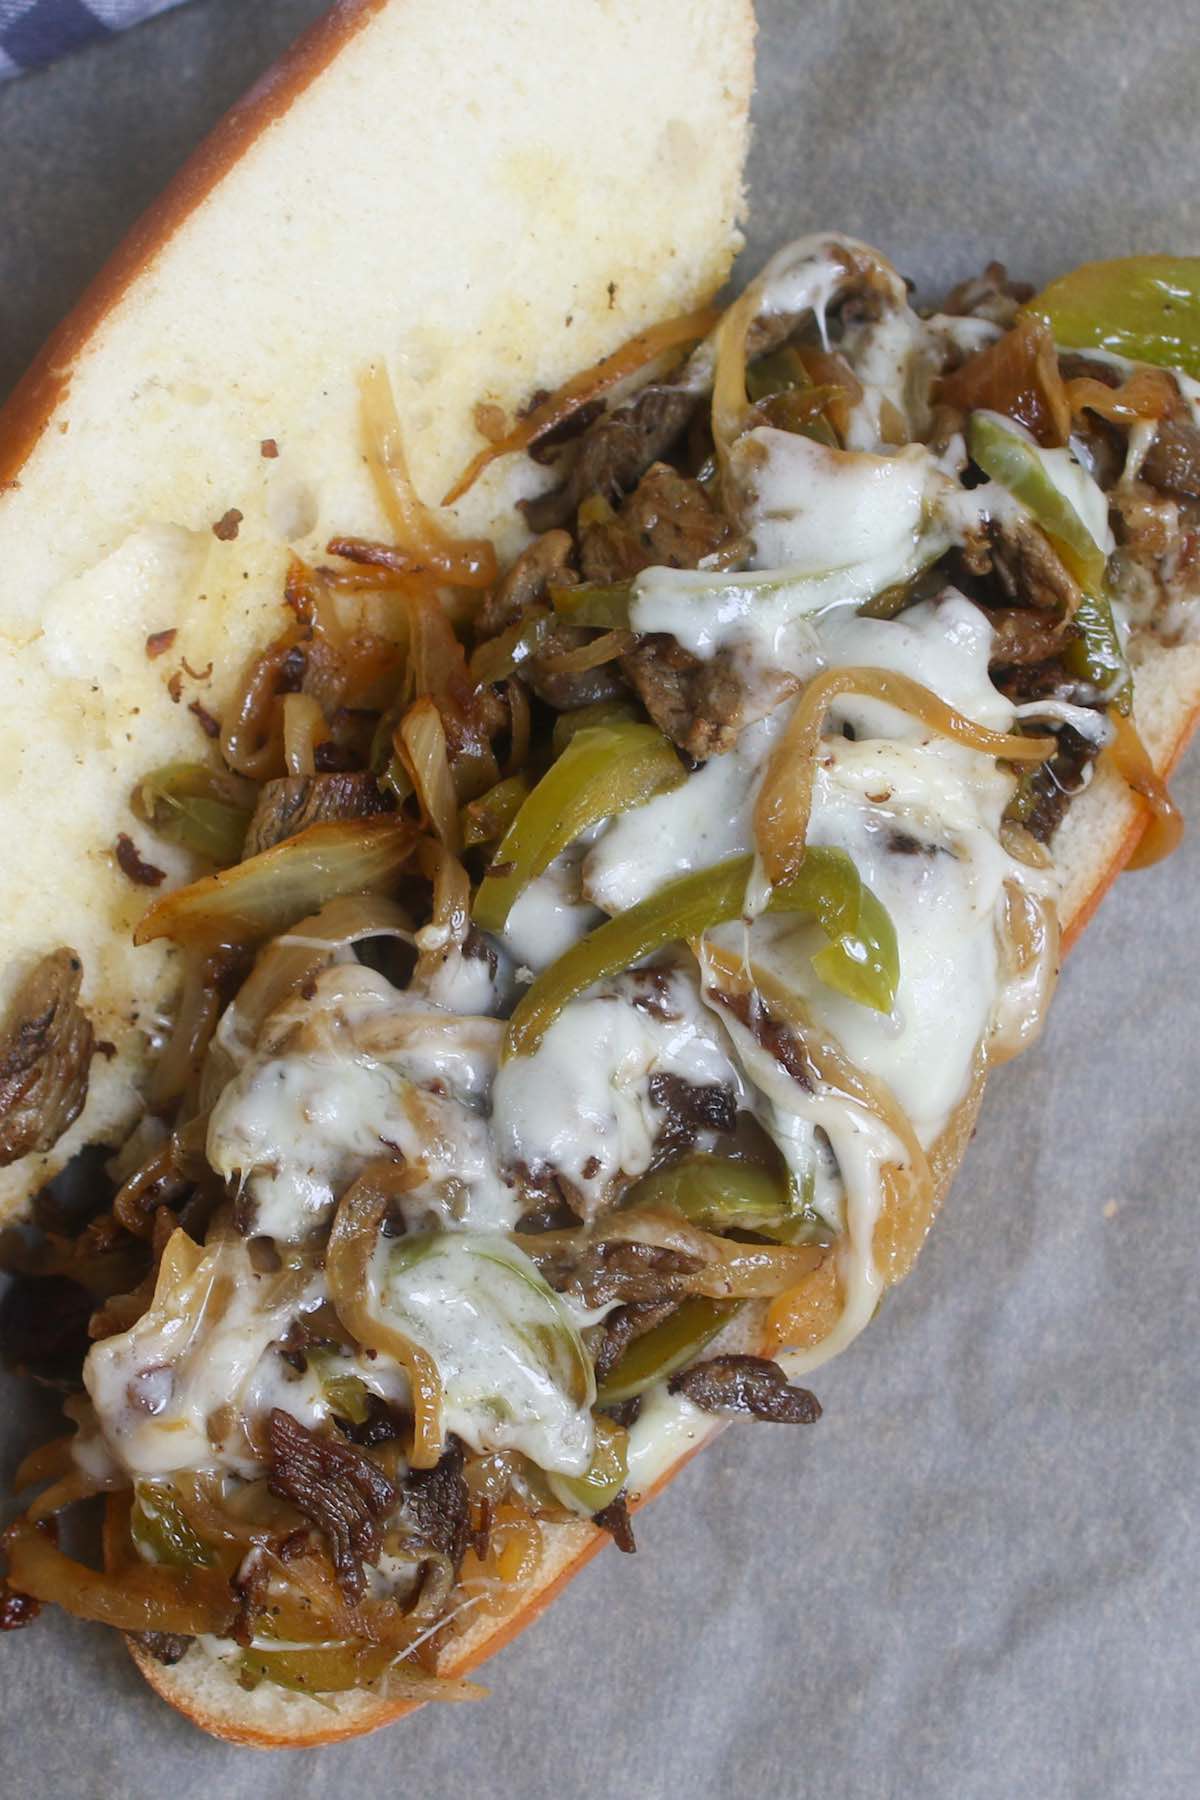 Philly cheesesteak recipe is made with thinly sliced rib-eye beef and sautéed onions, topped with ooey, gooey, melted provolone or Cheez Whiz, and served on a soft yet crusty hoagie roll!